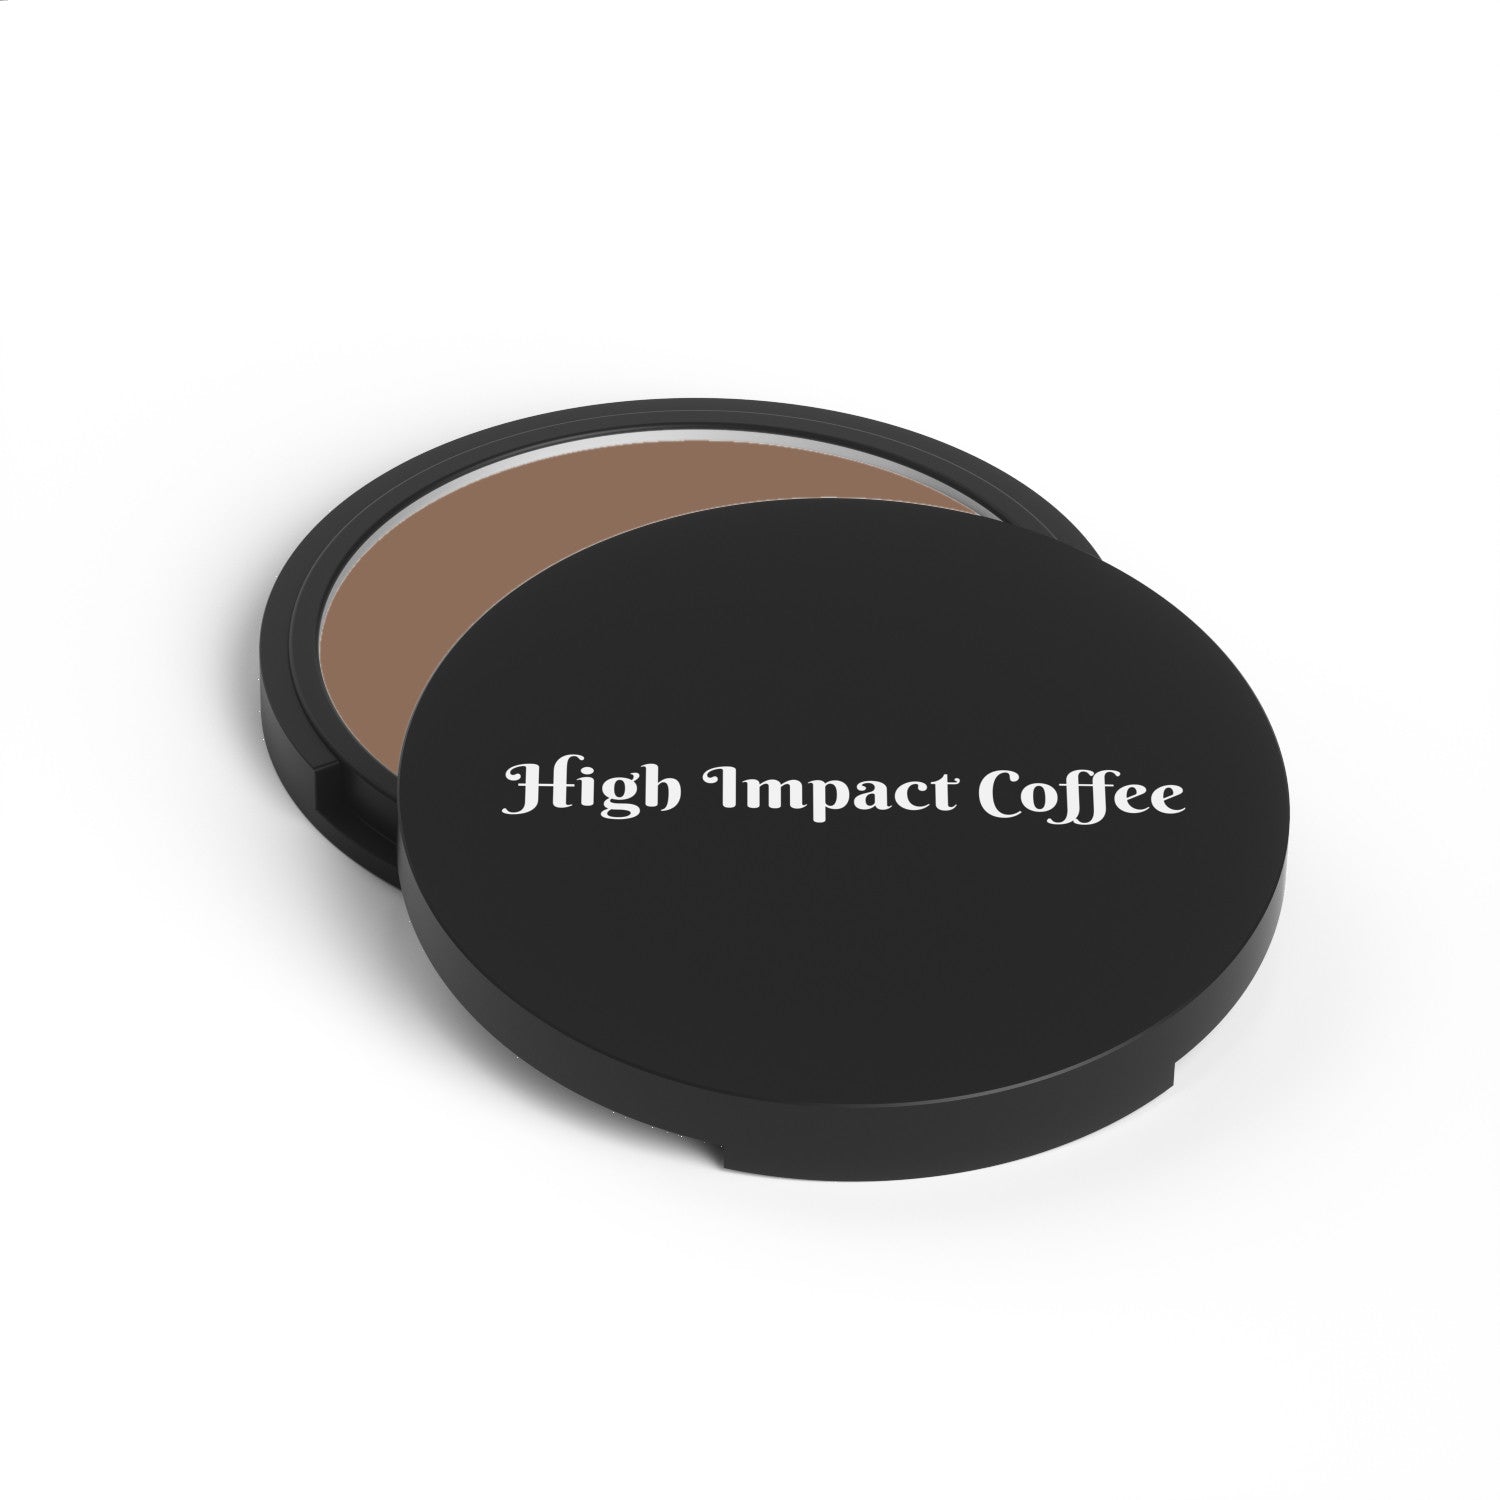 Bronzer Creams: Get a Sun-Kissed Glow - High Impact Coffee